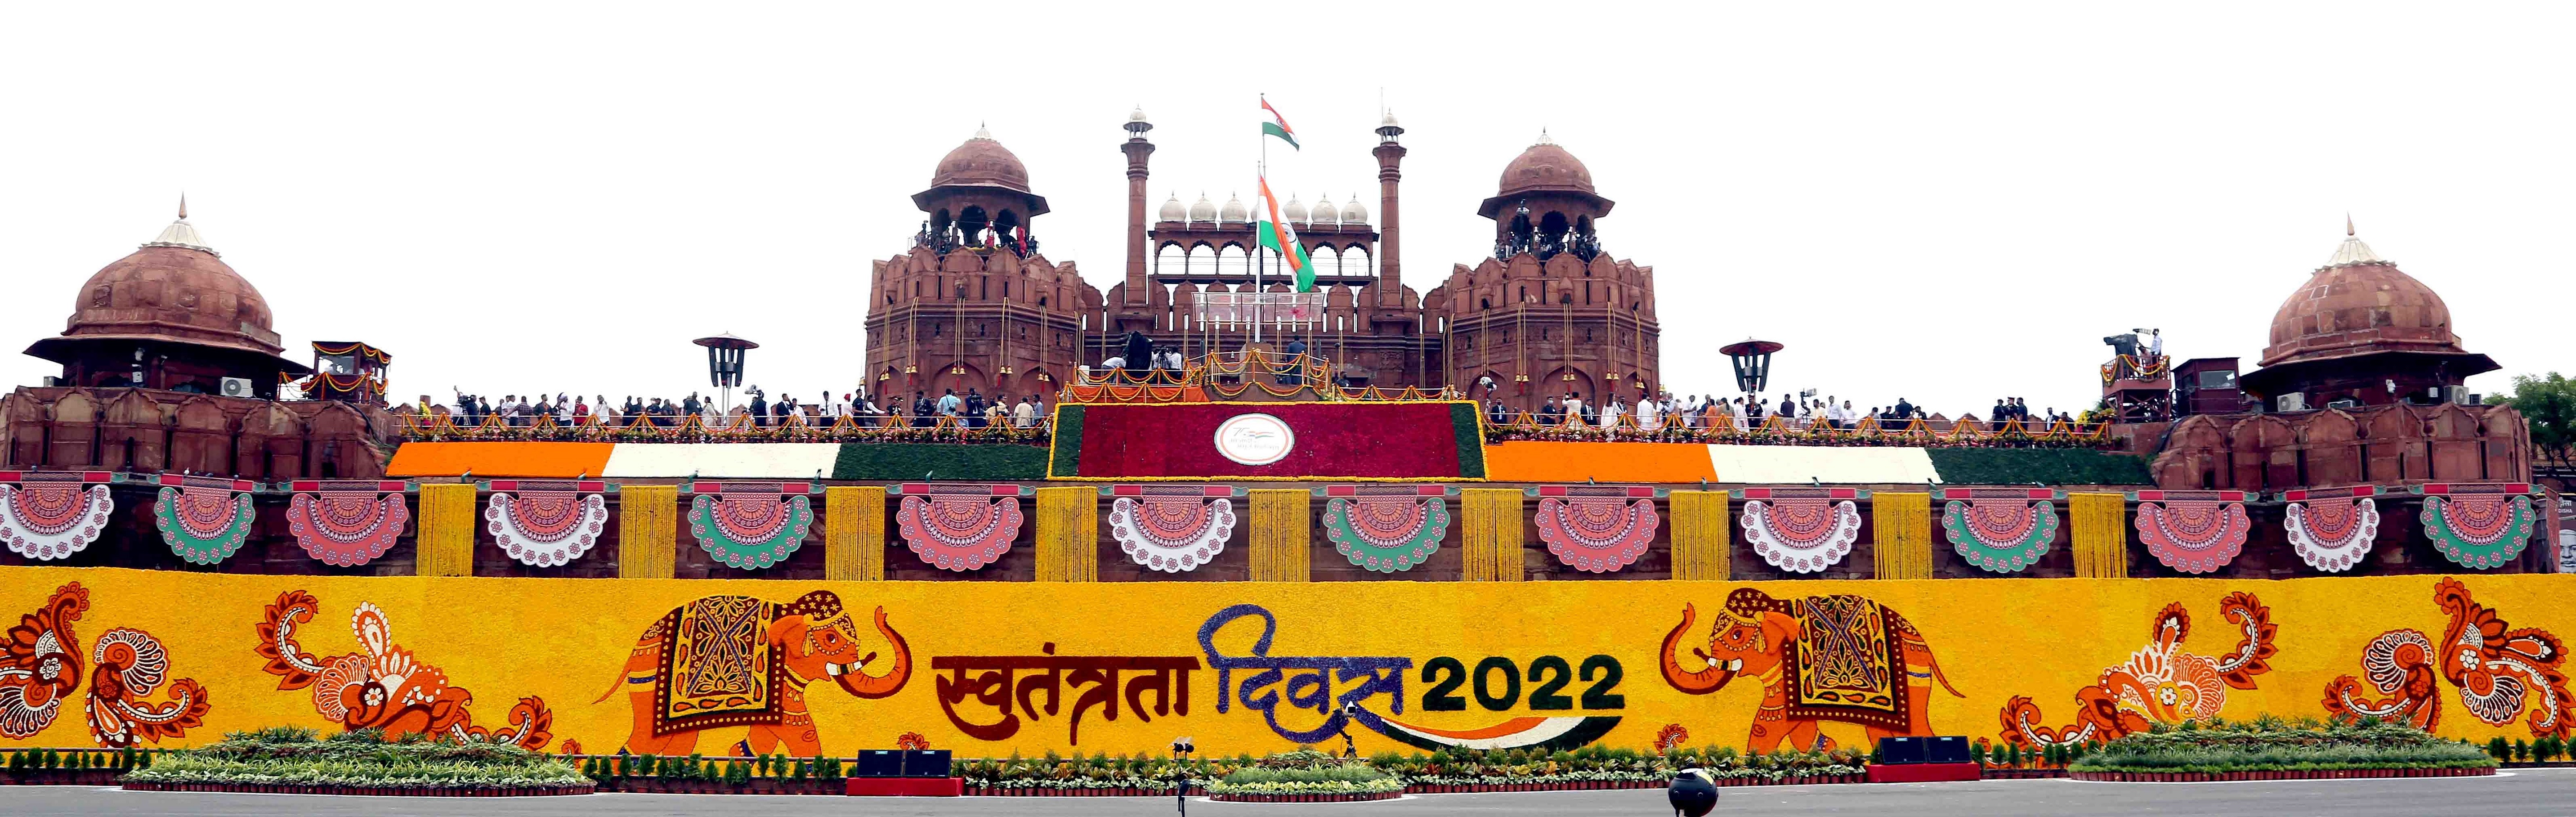 Independence Day celebrations at Red Fort in Delhi on August 15, 2022